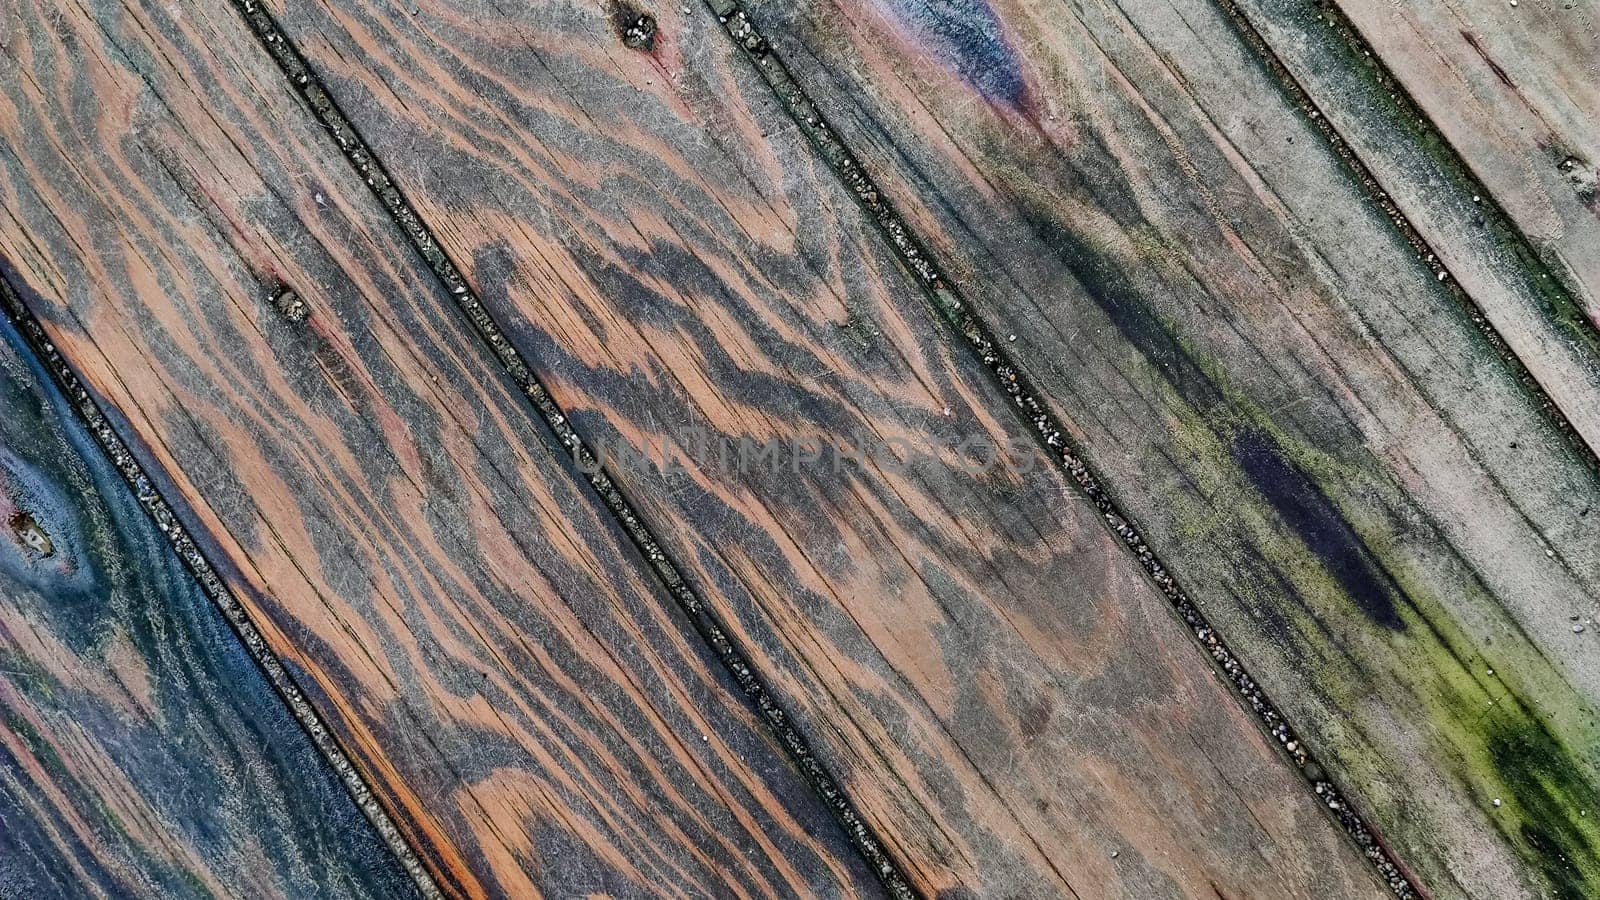 Wooden surface made of boards with multicolored spots from humidity, diagonal lines, top view, close-up.